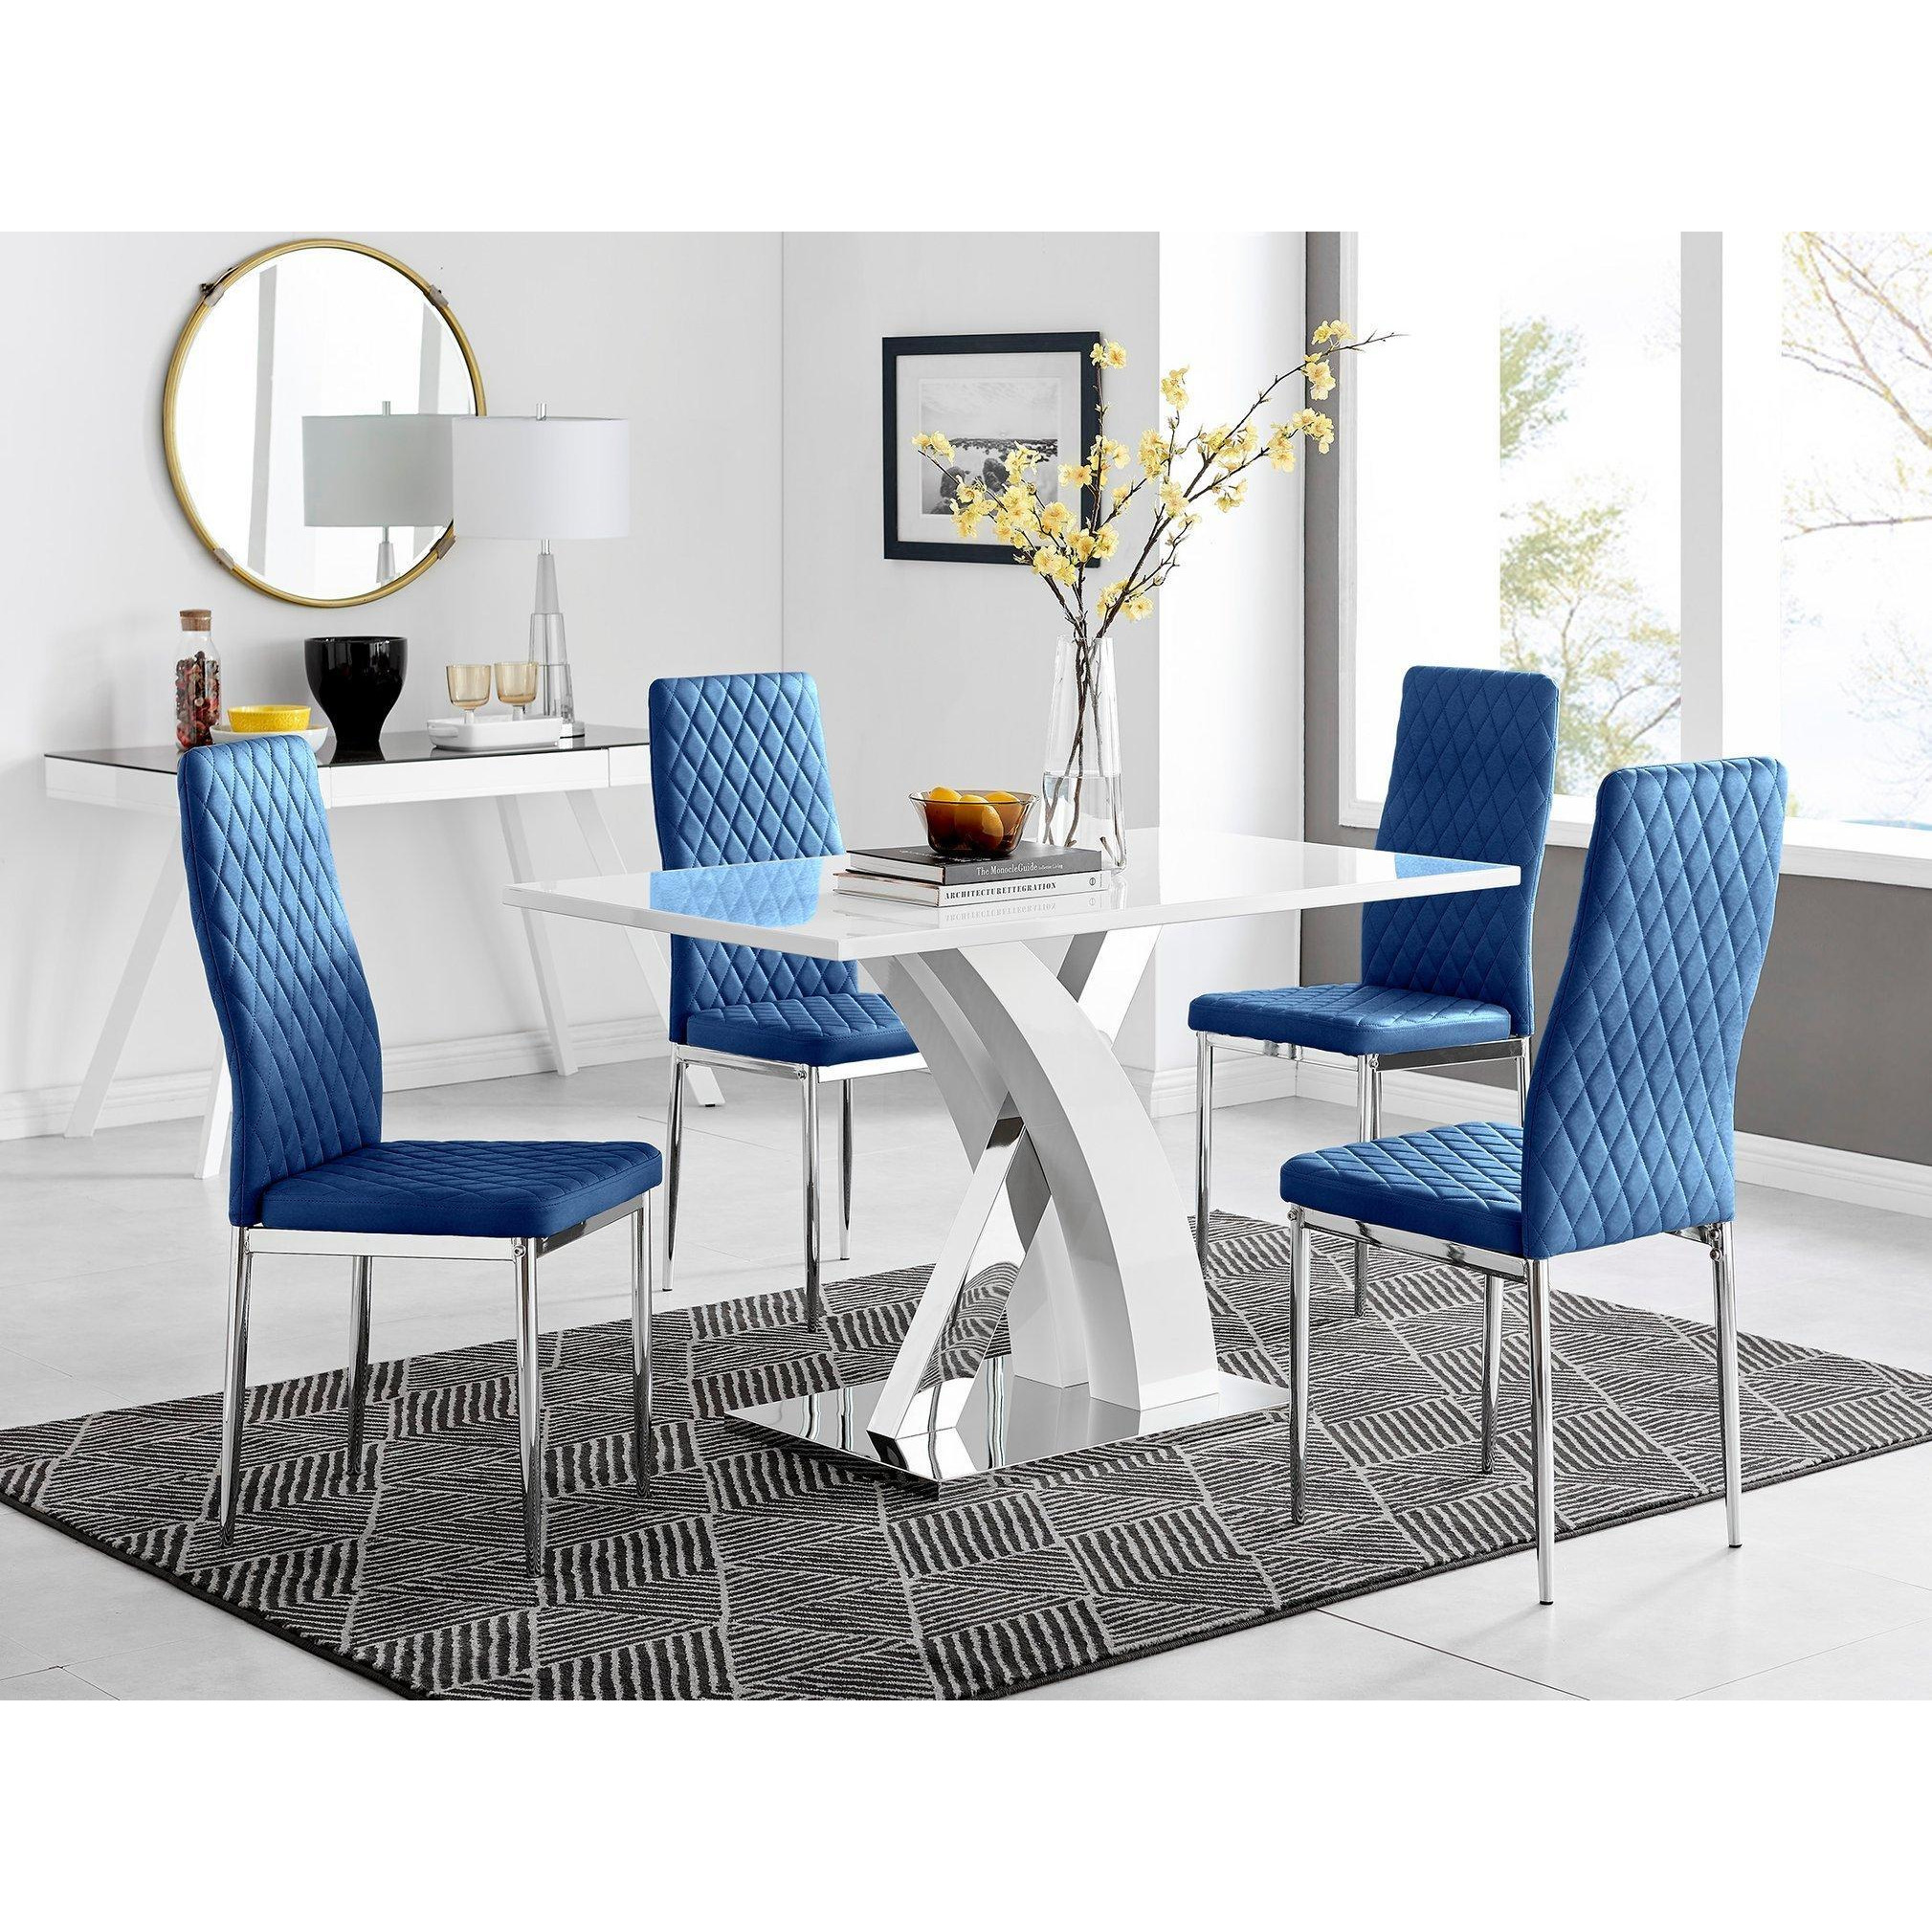 Atlanta White High Gloss and Chrome 4 Seater Dining Table with X Shaped Legs and 4 Soft Velvet Milan Chairs - image 1